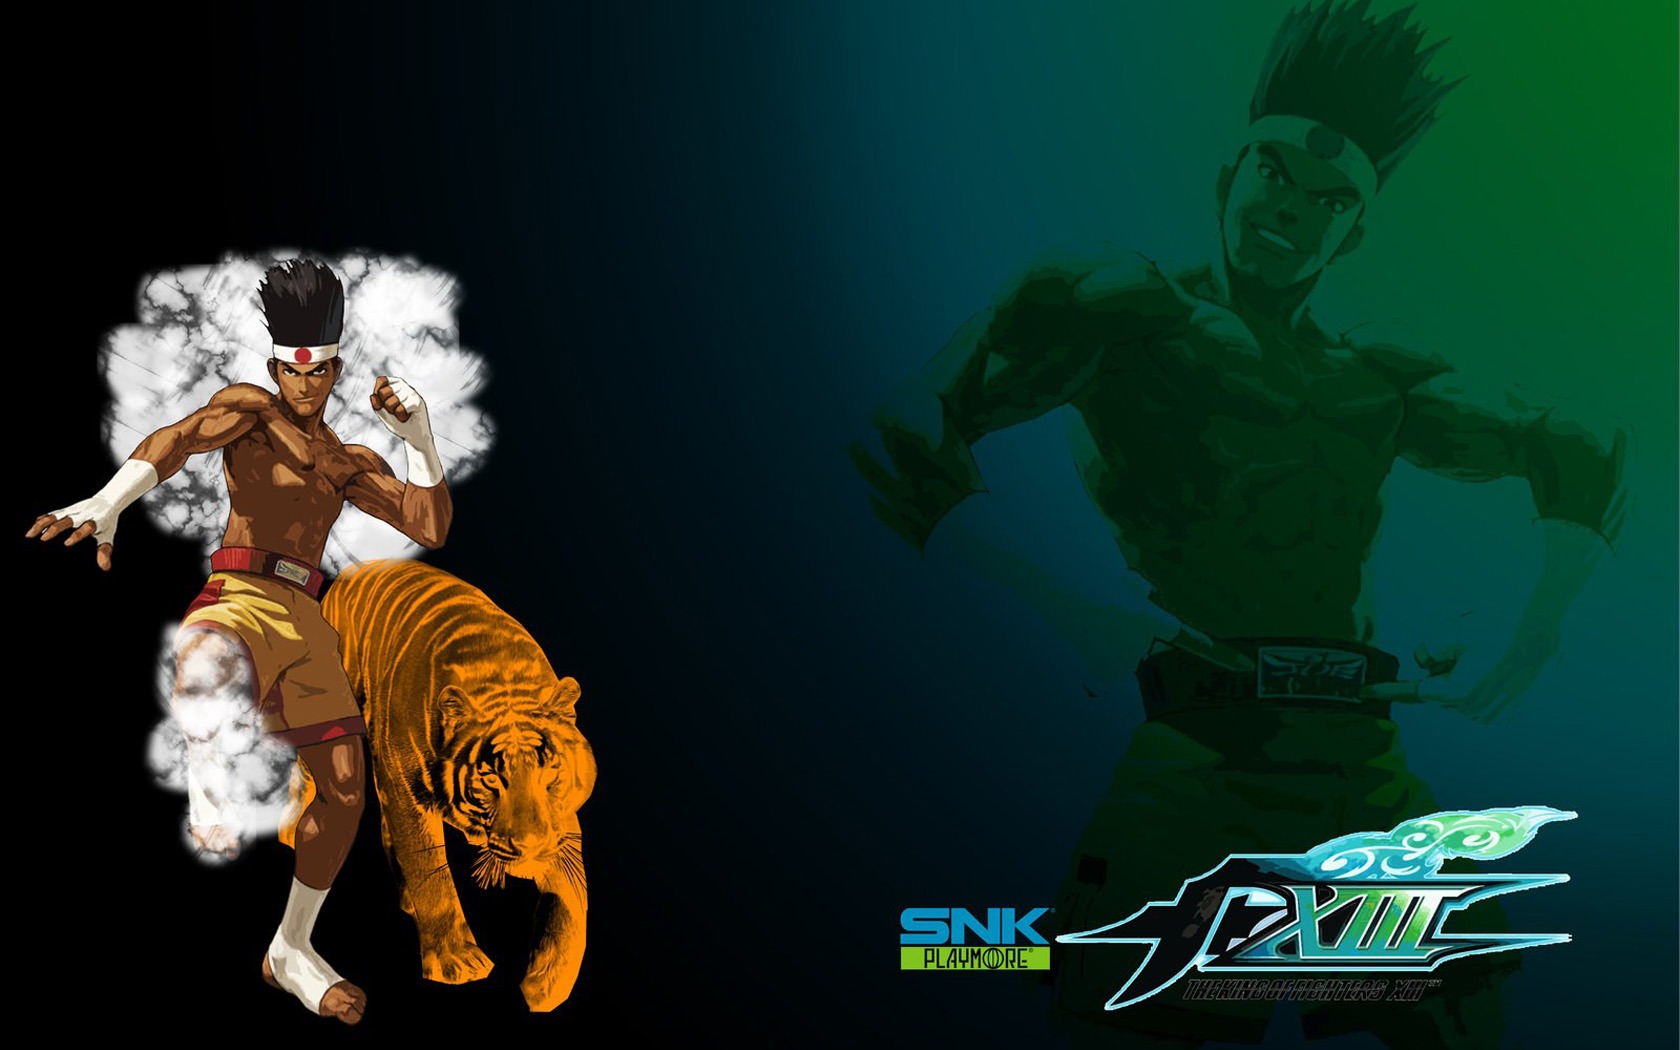 The King of Fighters XIII wallpapers #13 - 1680x1050